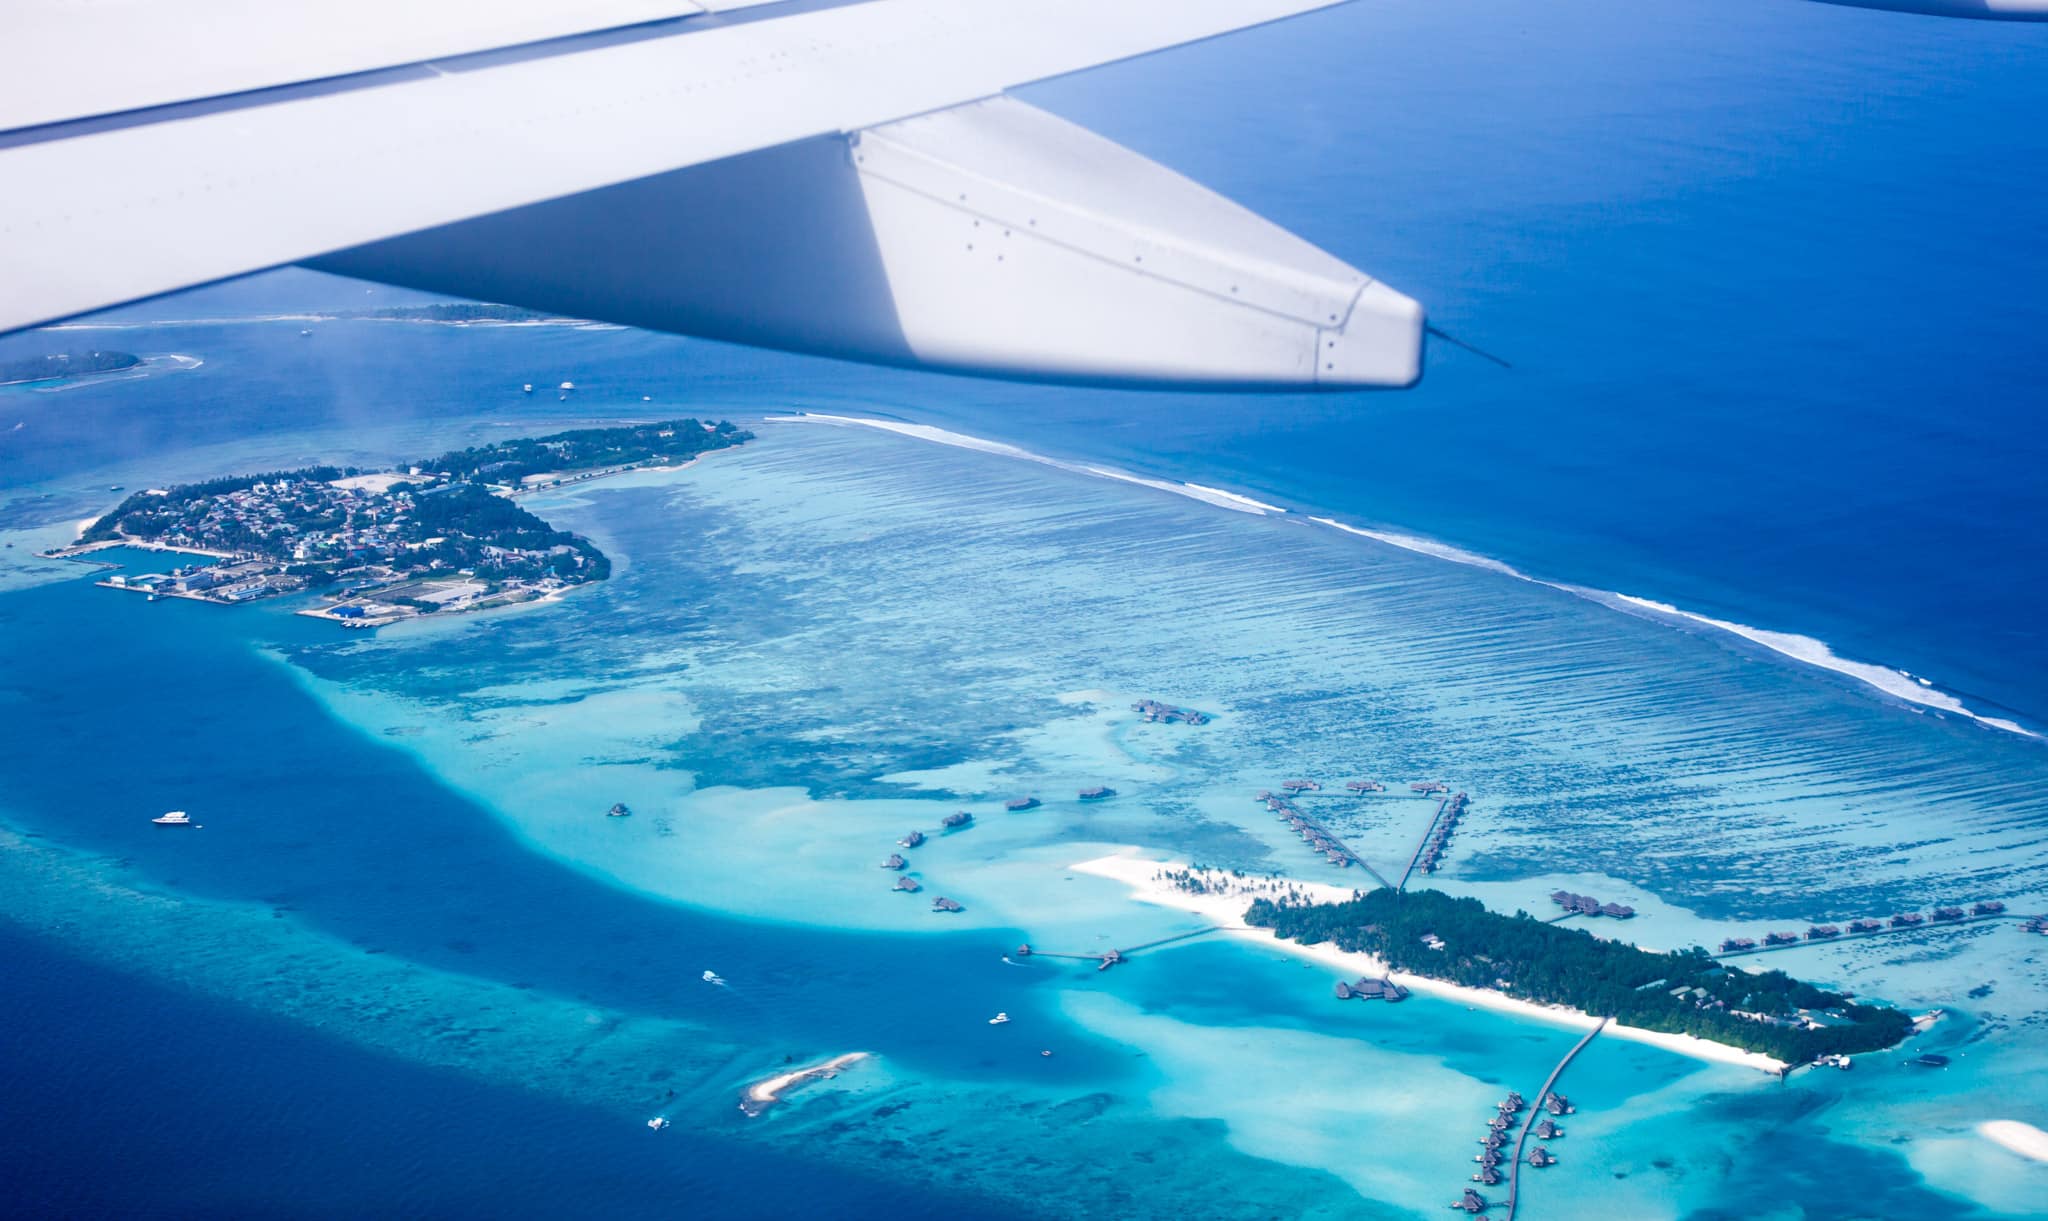 Arriving into the Maldives with an unexpected business upgrade on an already 'free' ticket